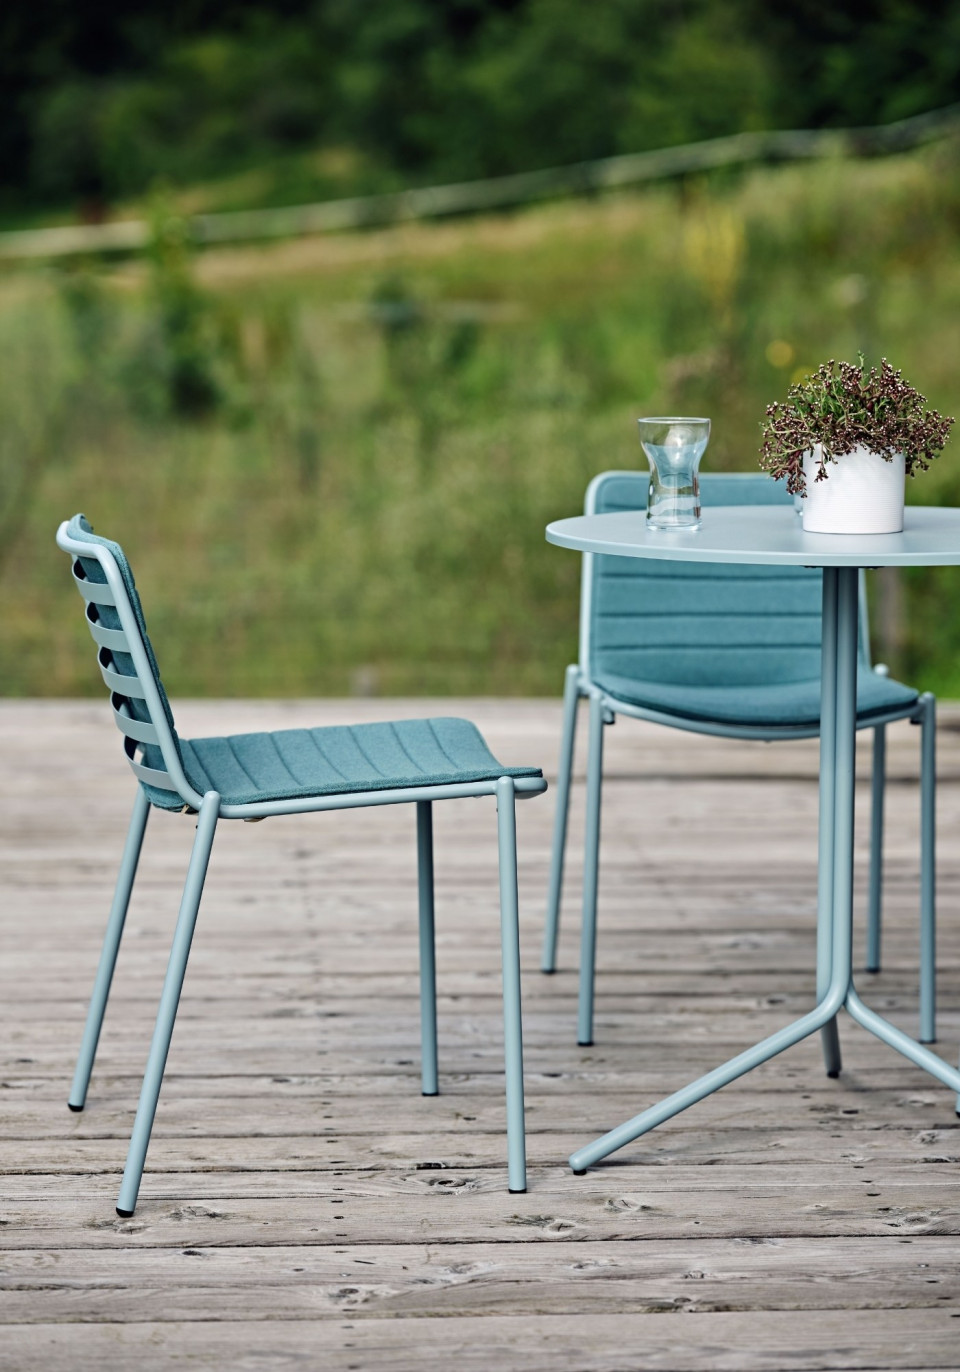 Trampoliere collection for indoor and outdoor by Midj